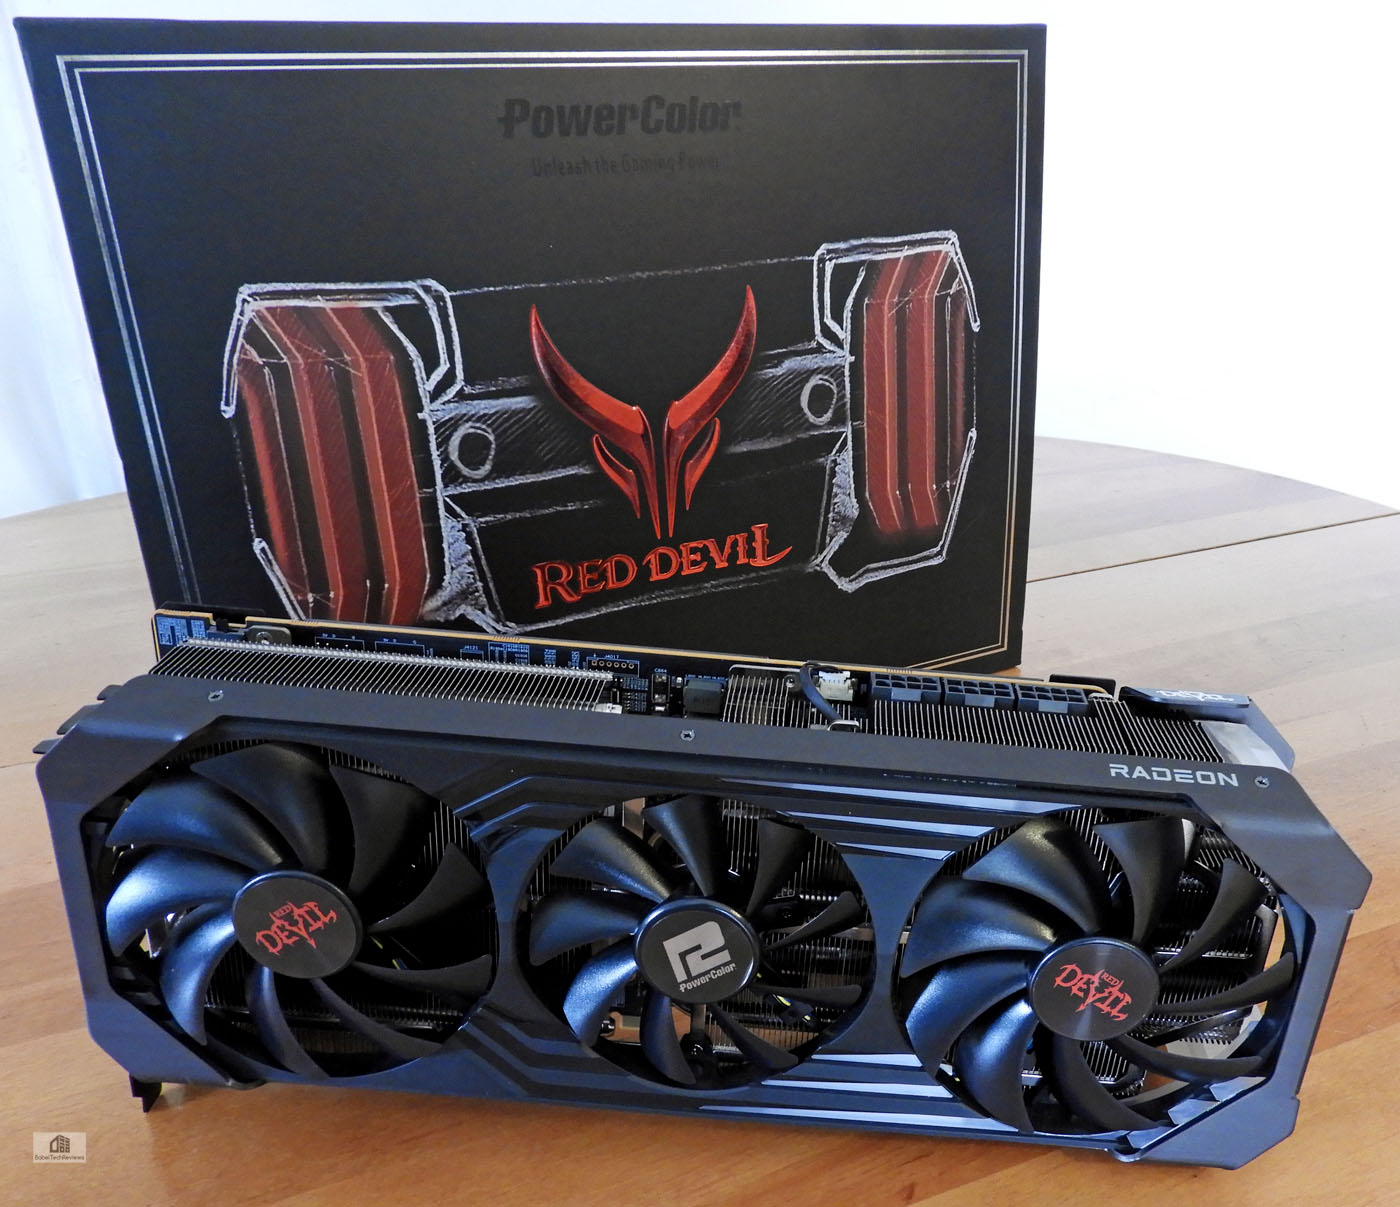 VR Wars: The Red Devil RTX 6900 XT versus the RTX 3090 Founders Edition (Part 2)